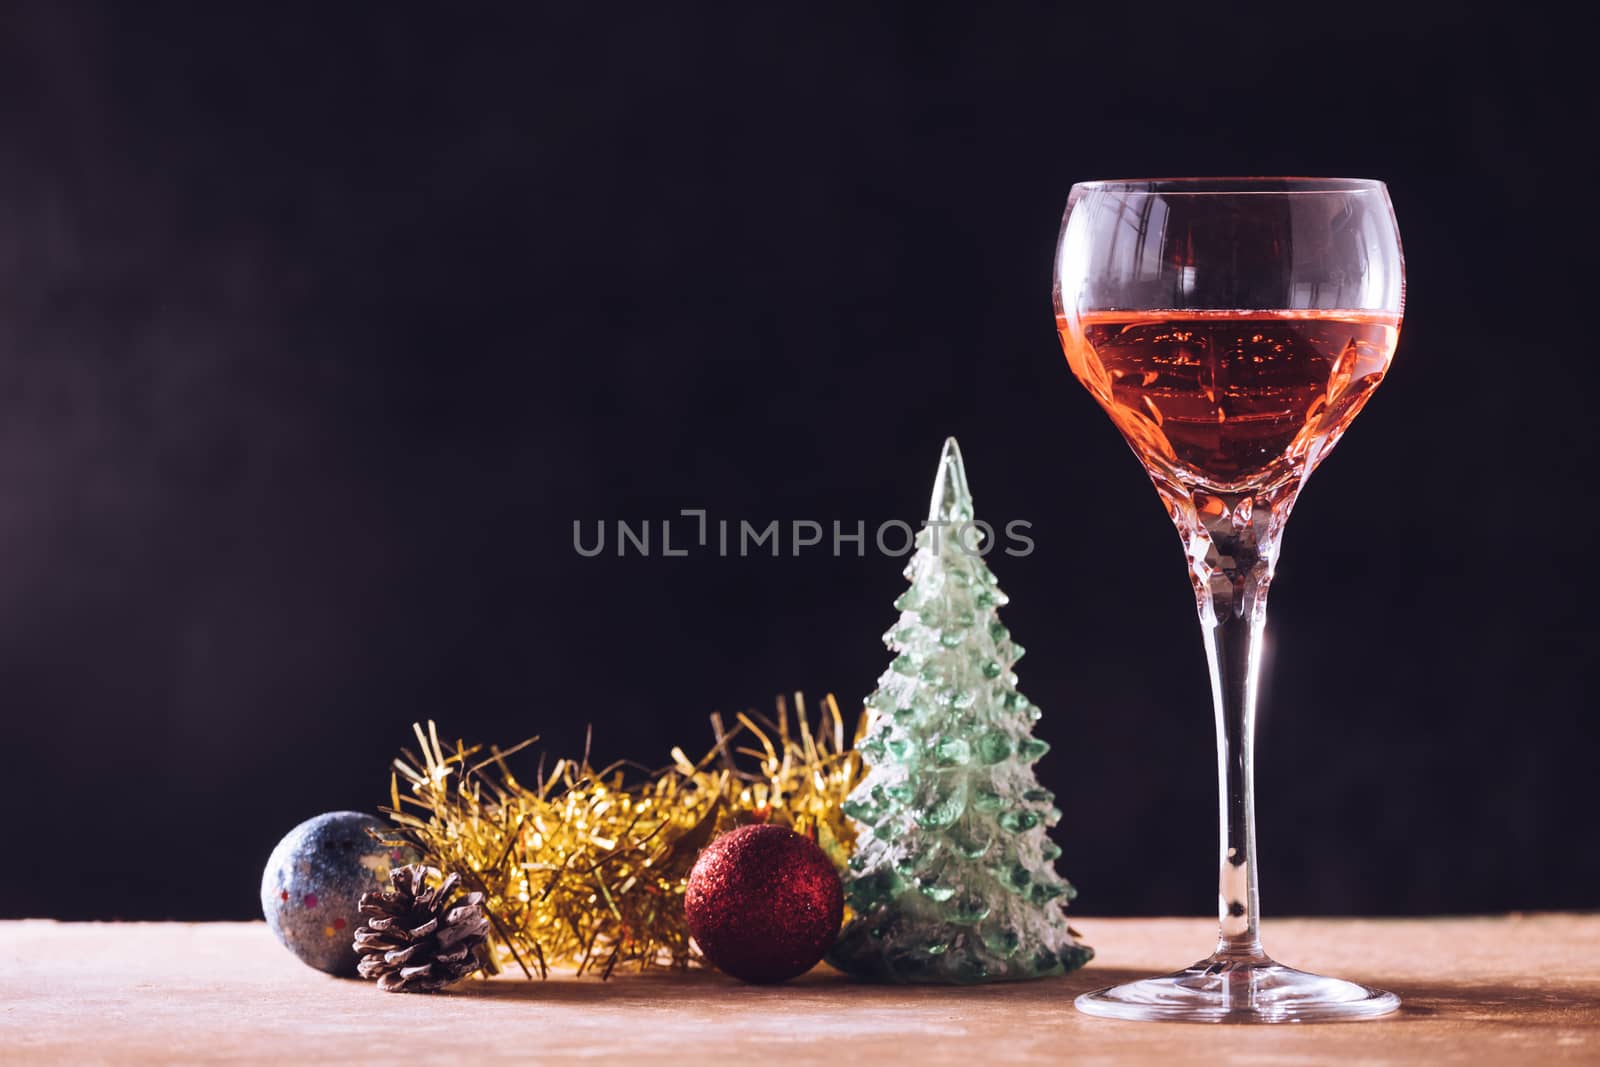 Glass of wine with Christmas decorations on the wooden table, bl by ronnarong